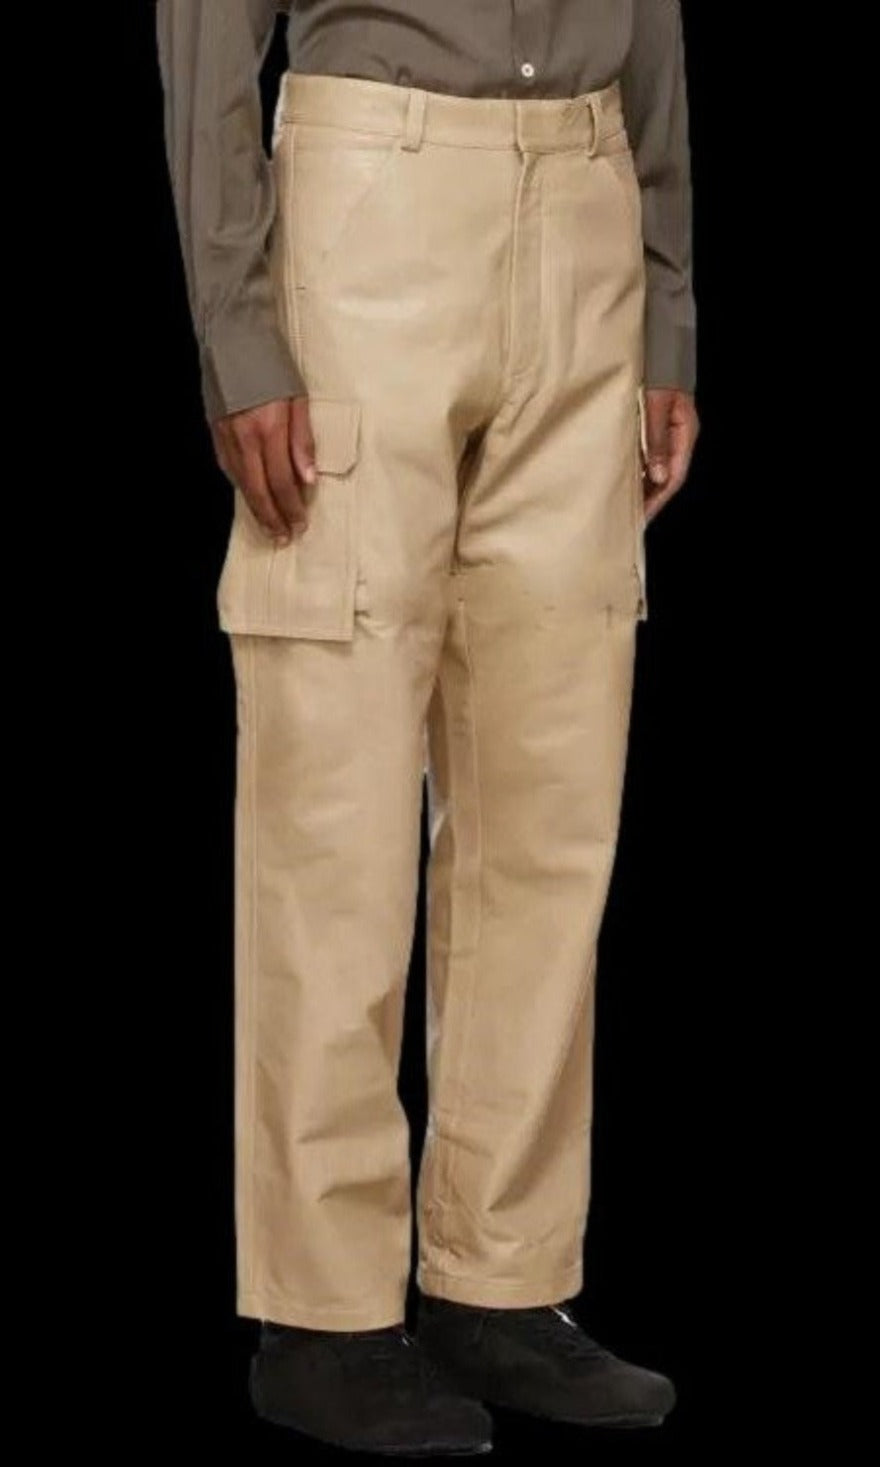 Picture of a model wearing our white leather cargo pants, side view. with black background for contrast.